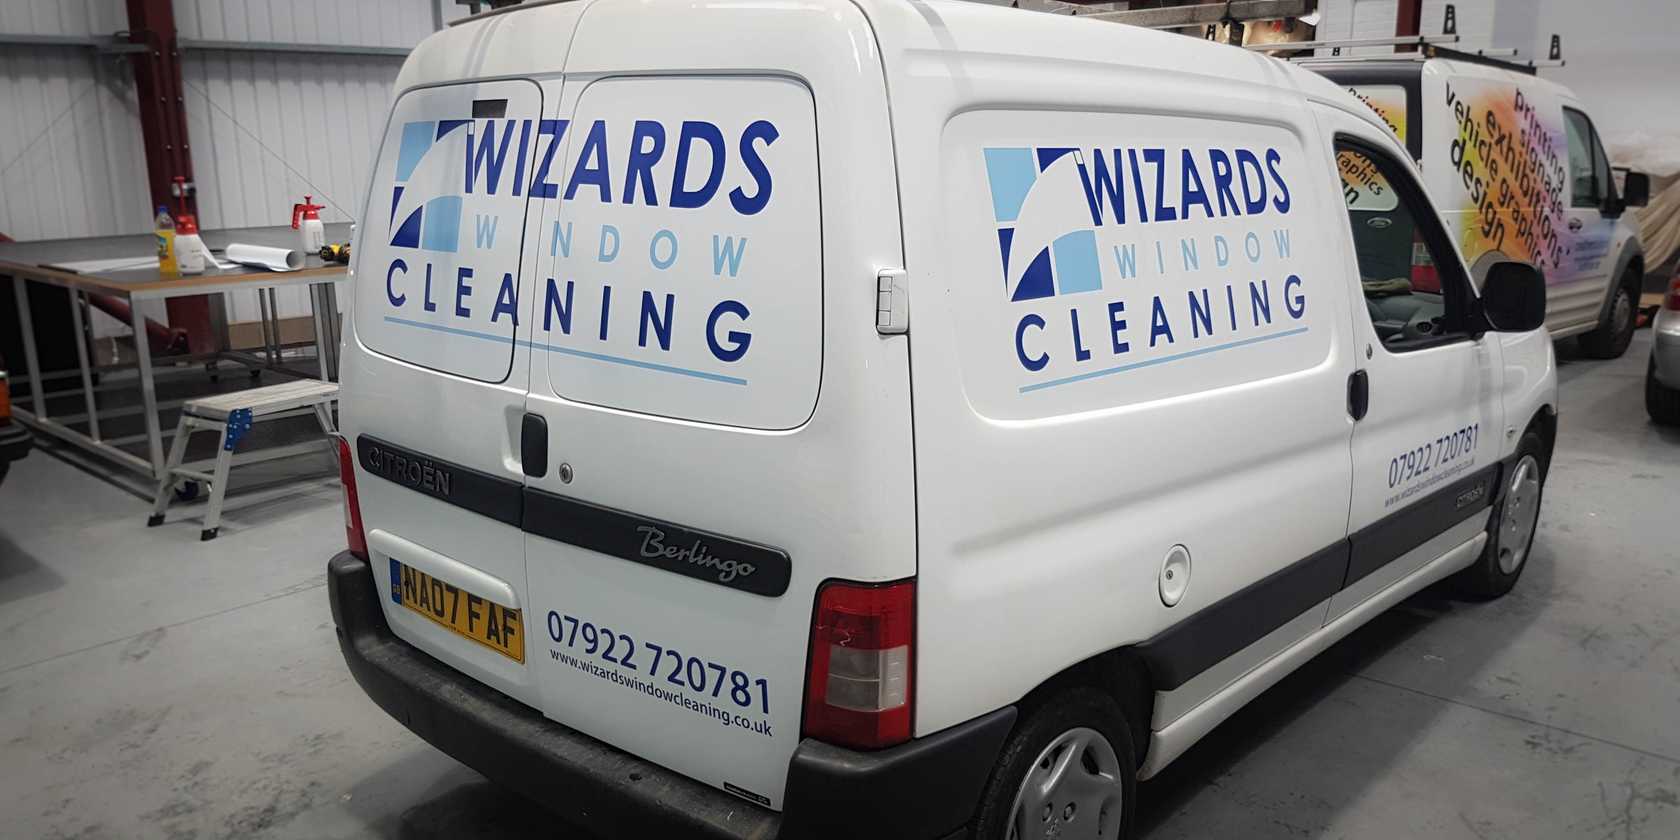 Van Signwriting Wizards Window Cleaning